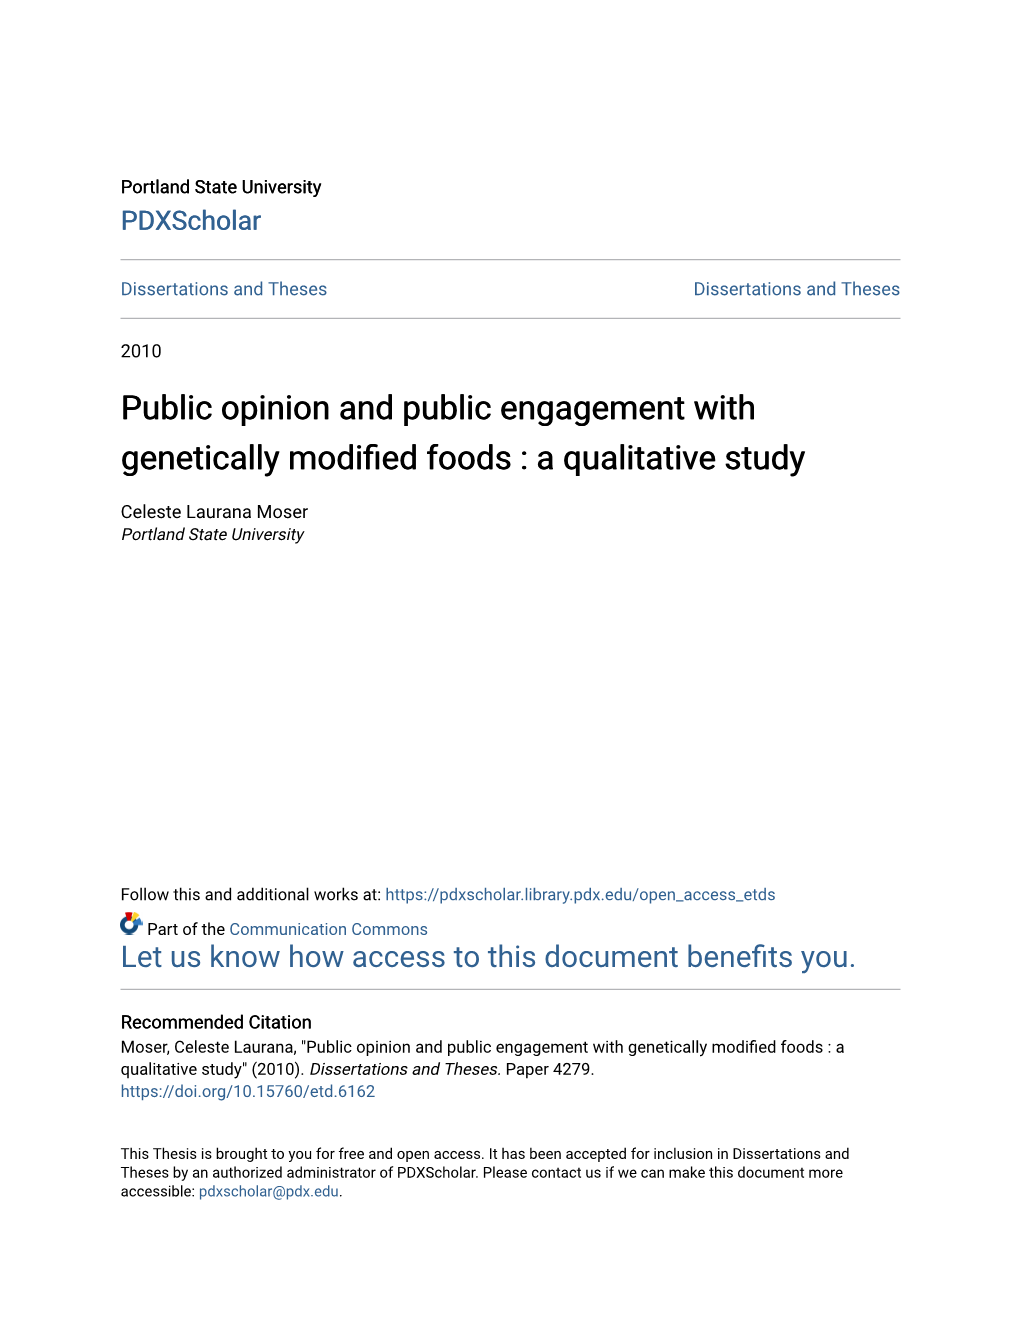 Public Opinion and Public Engagement with Genetically Modified Foods : a Qualitative Study